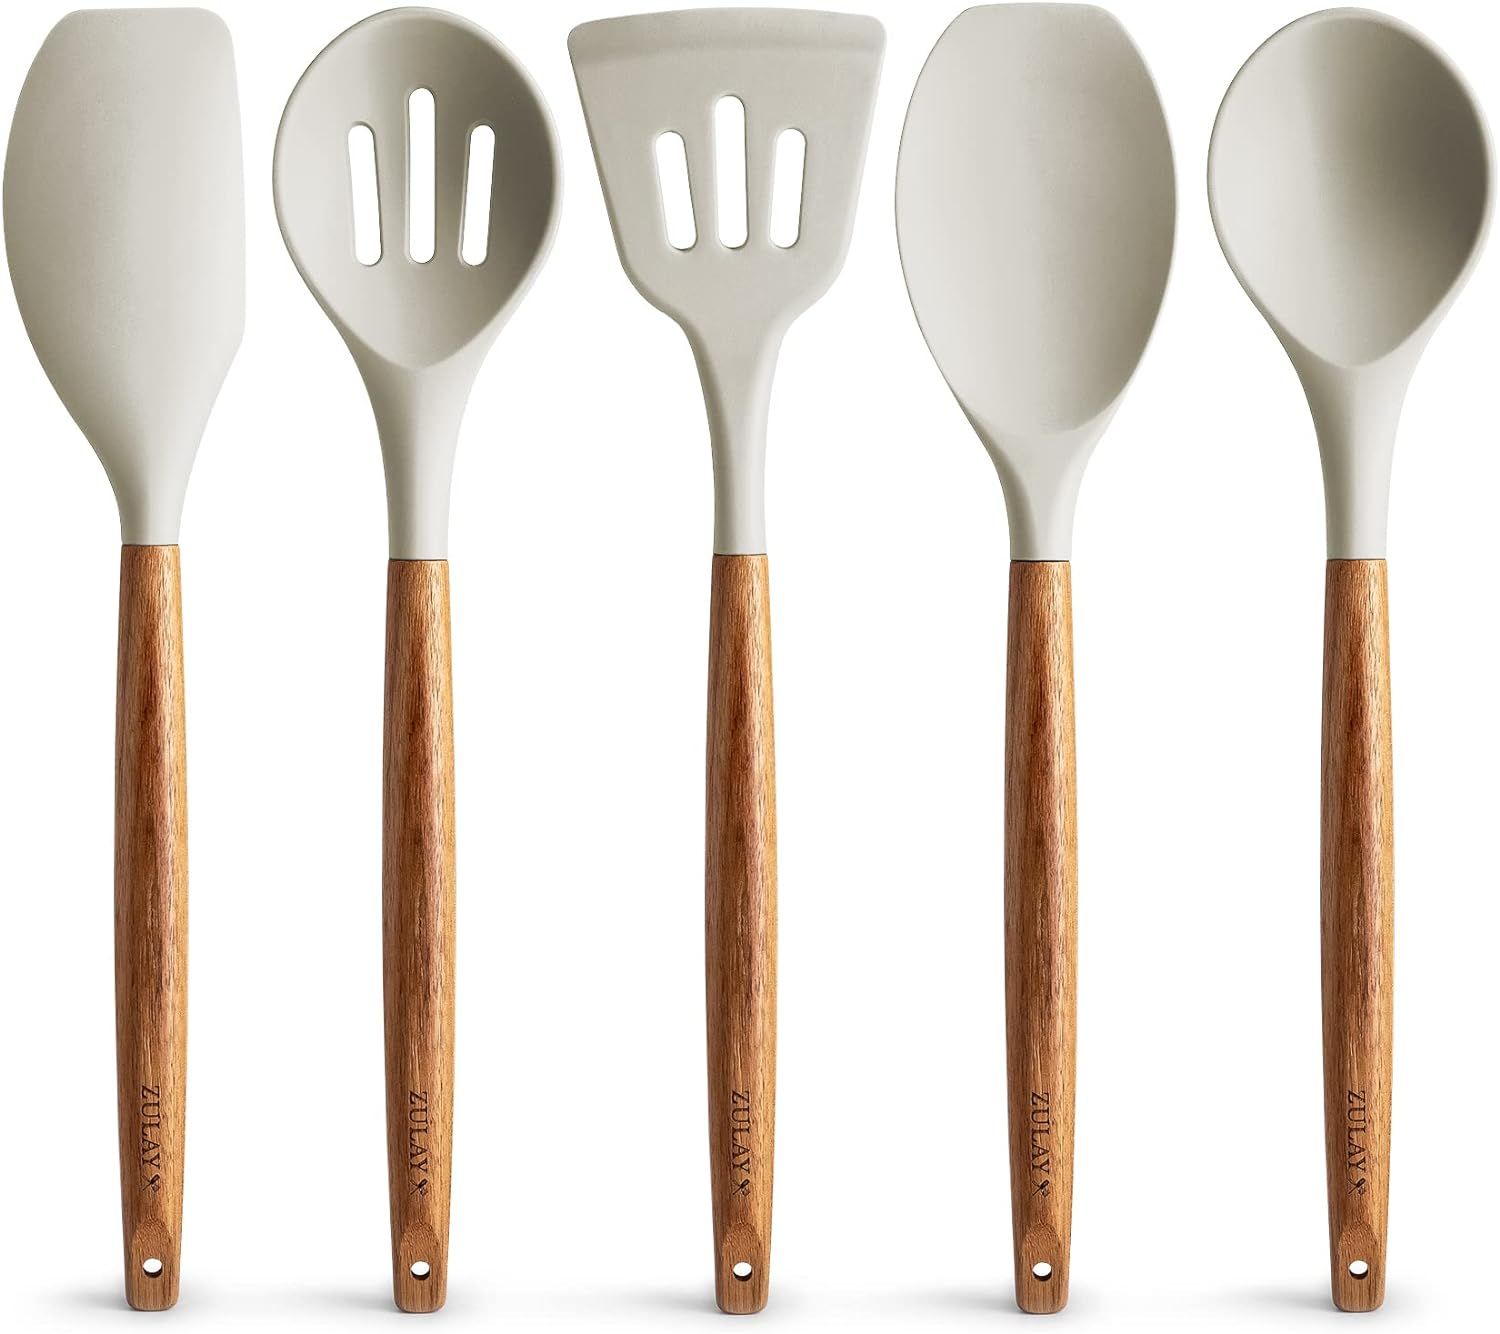 Zulay Kitchen Non-Stick Silicone Cooking Utensils Set with Authentic Acacia Wood Handles - 5 Piec... | Amazon (US)